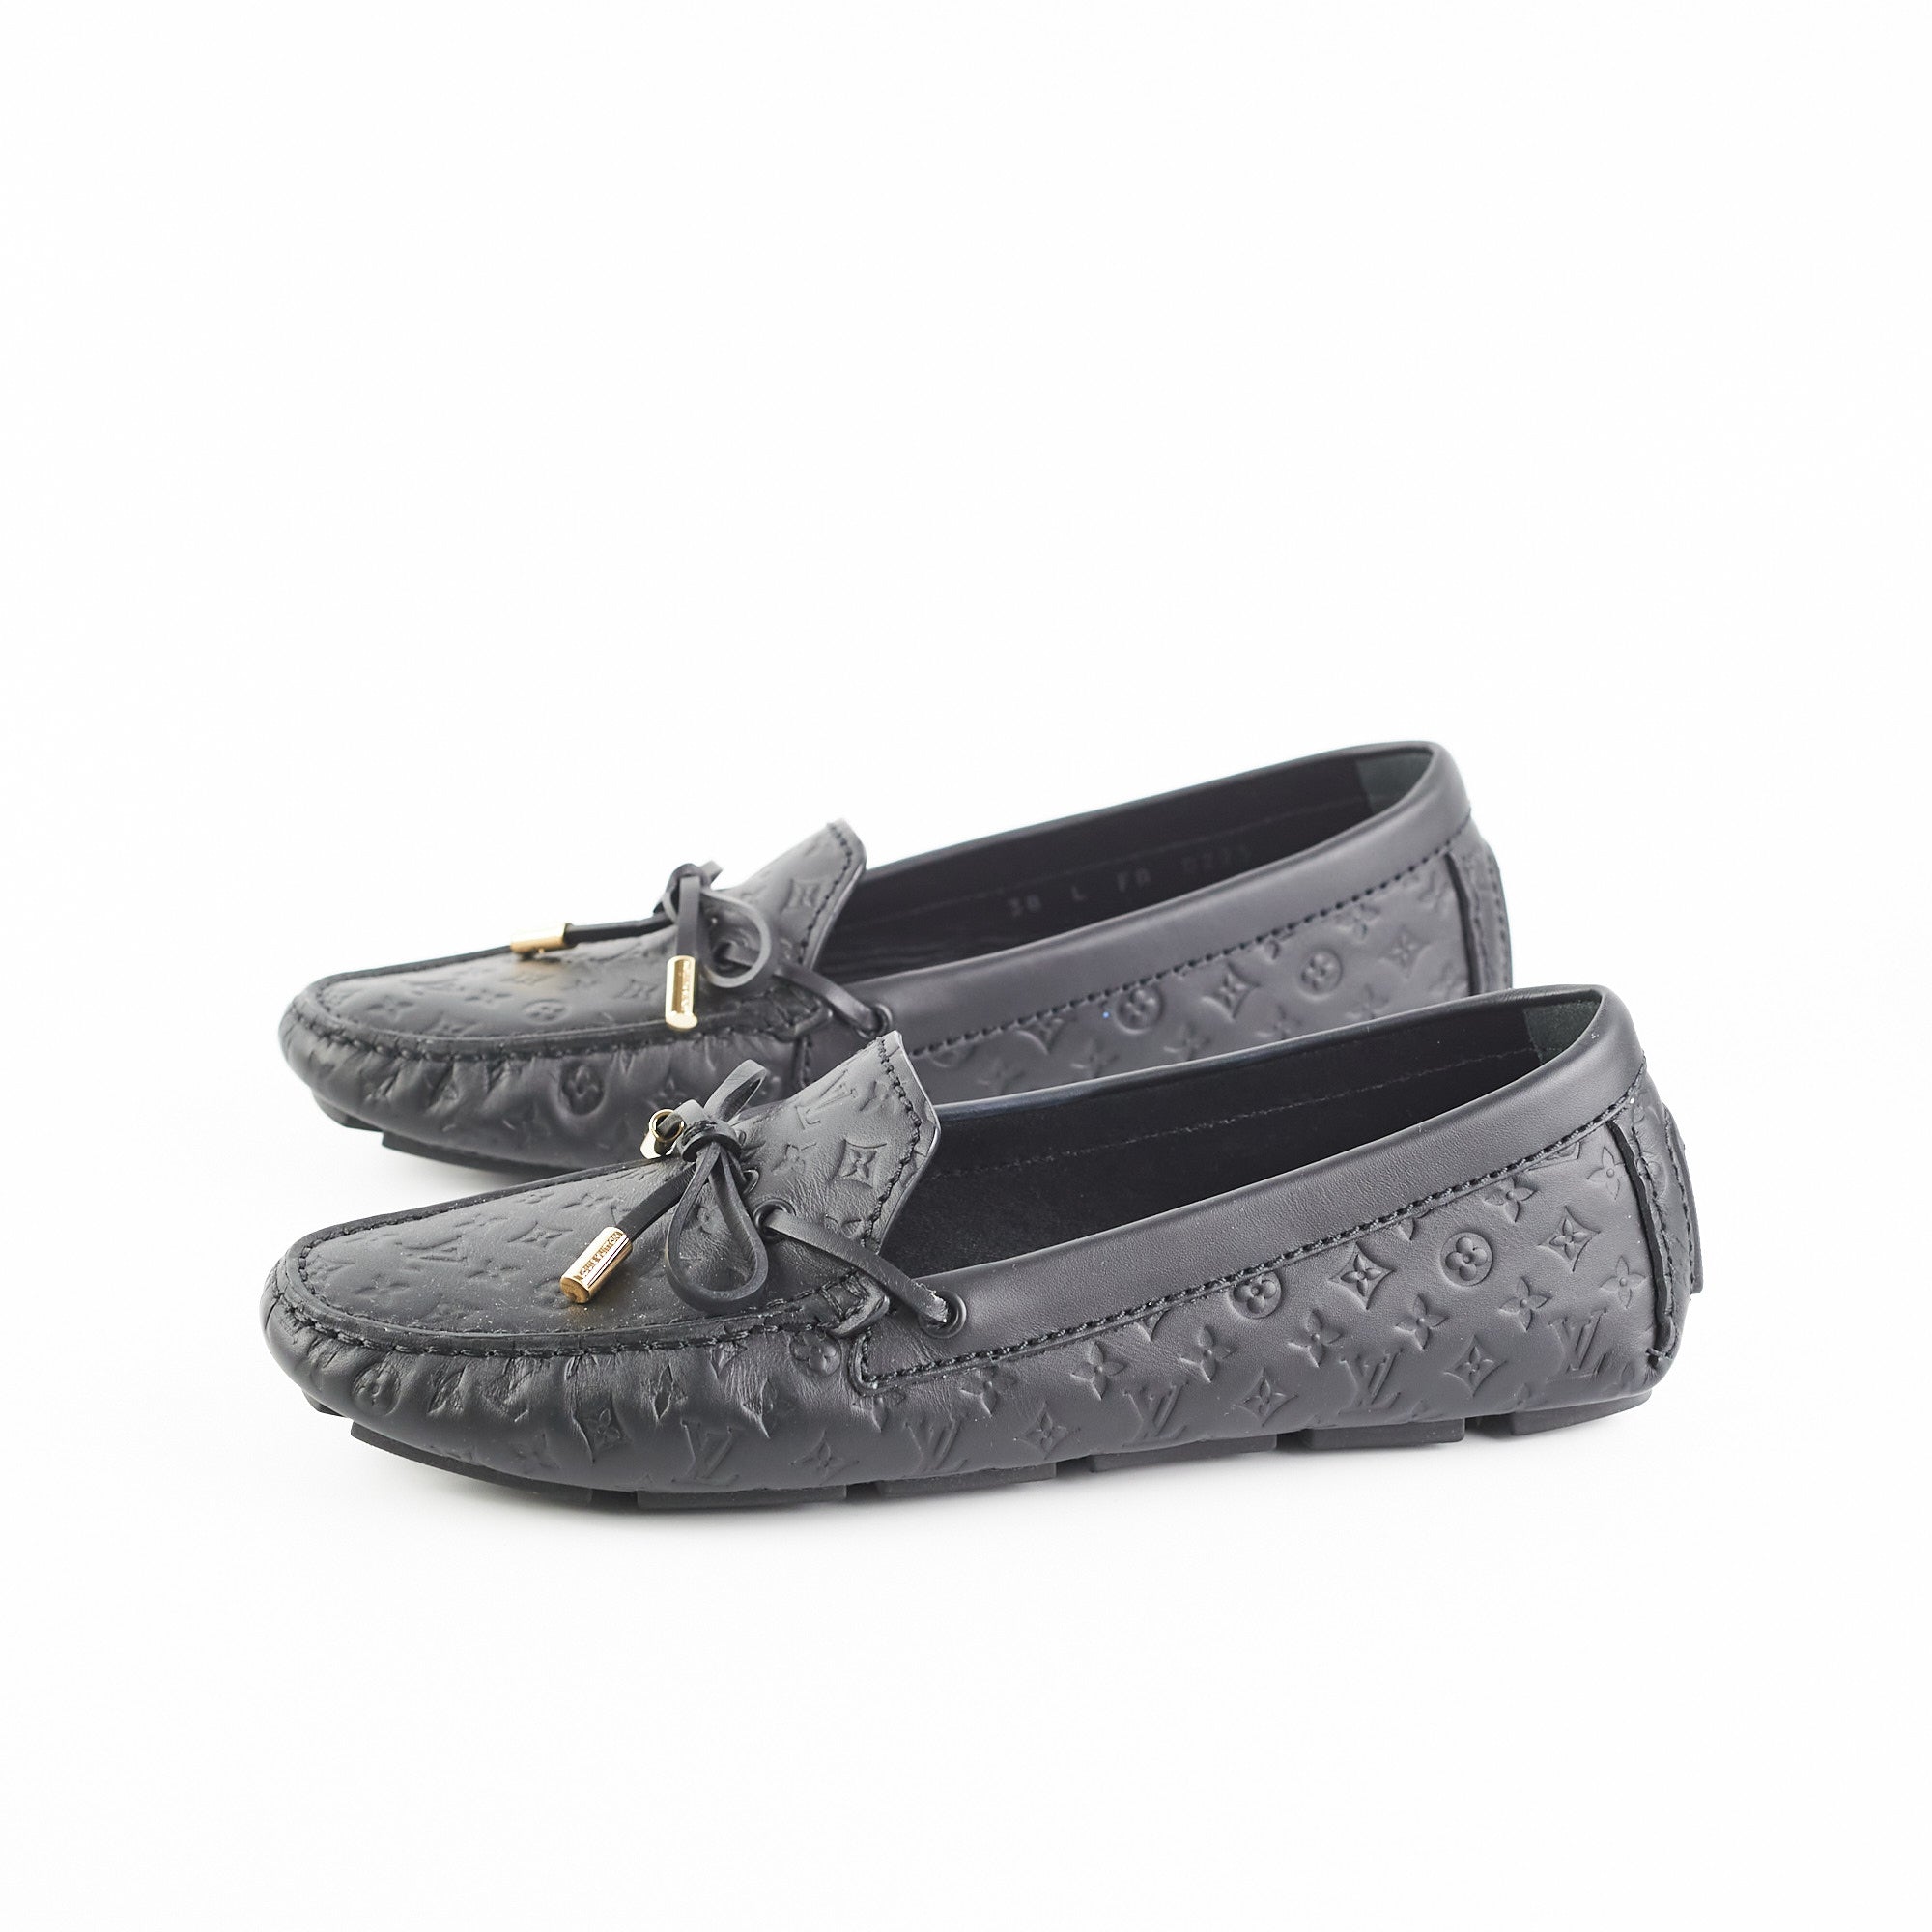 ❤new arrival❤ Name: Gloria Flat Loafers Black (Size 38) . SKU 15485 . Price:  $1150 AUD / $820 USD Price for payment via Paypal Friends…